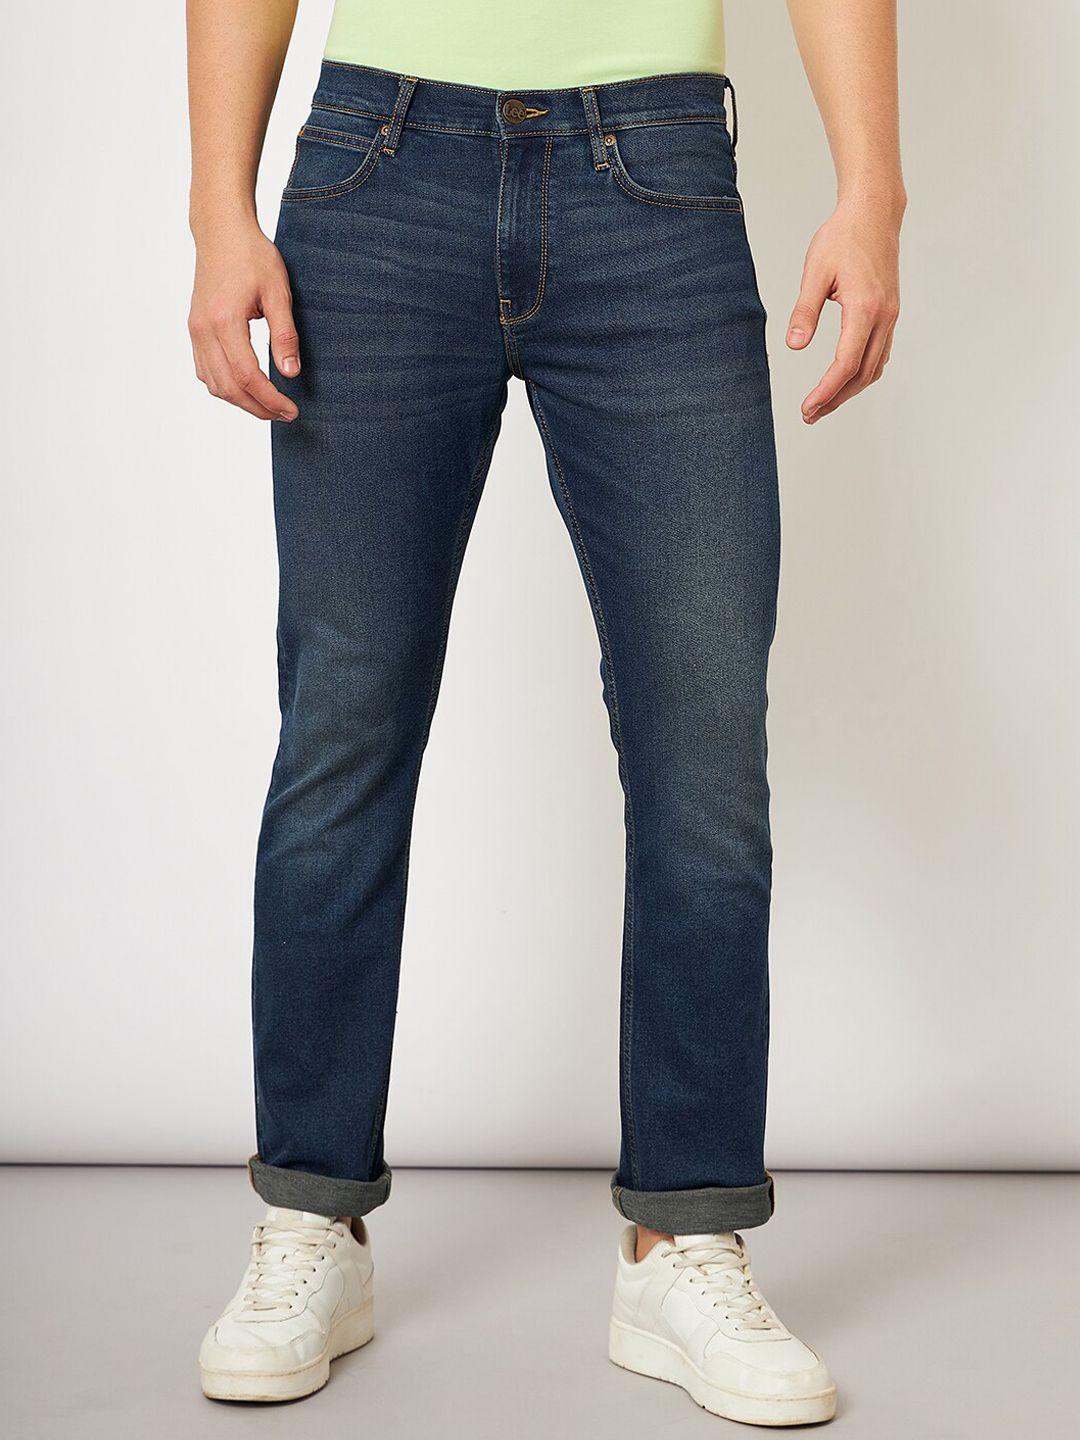 lee-men-rodeo-fit-light-fade-clean-look-stretchable-jeans